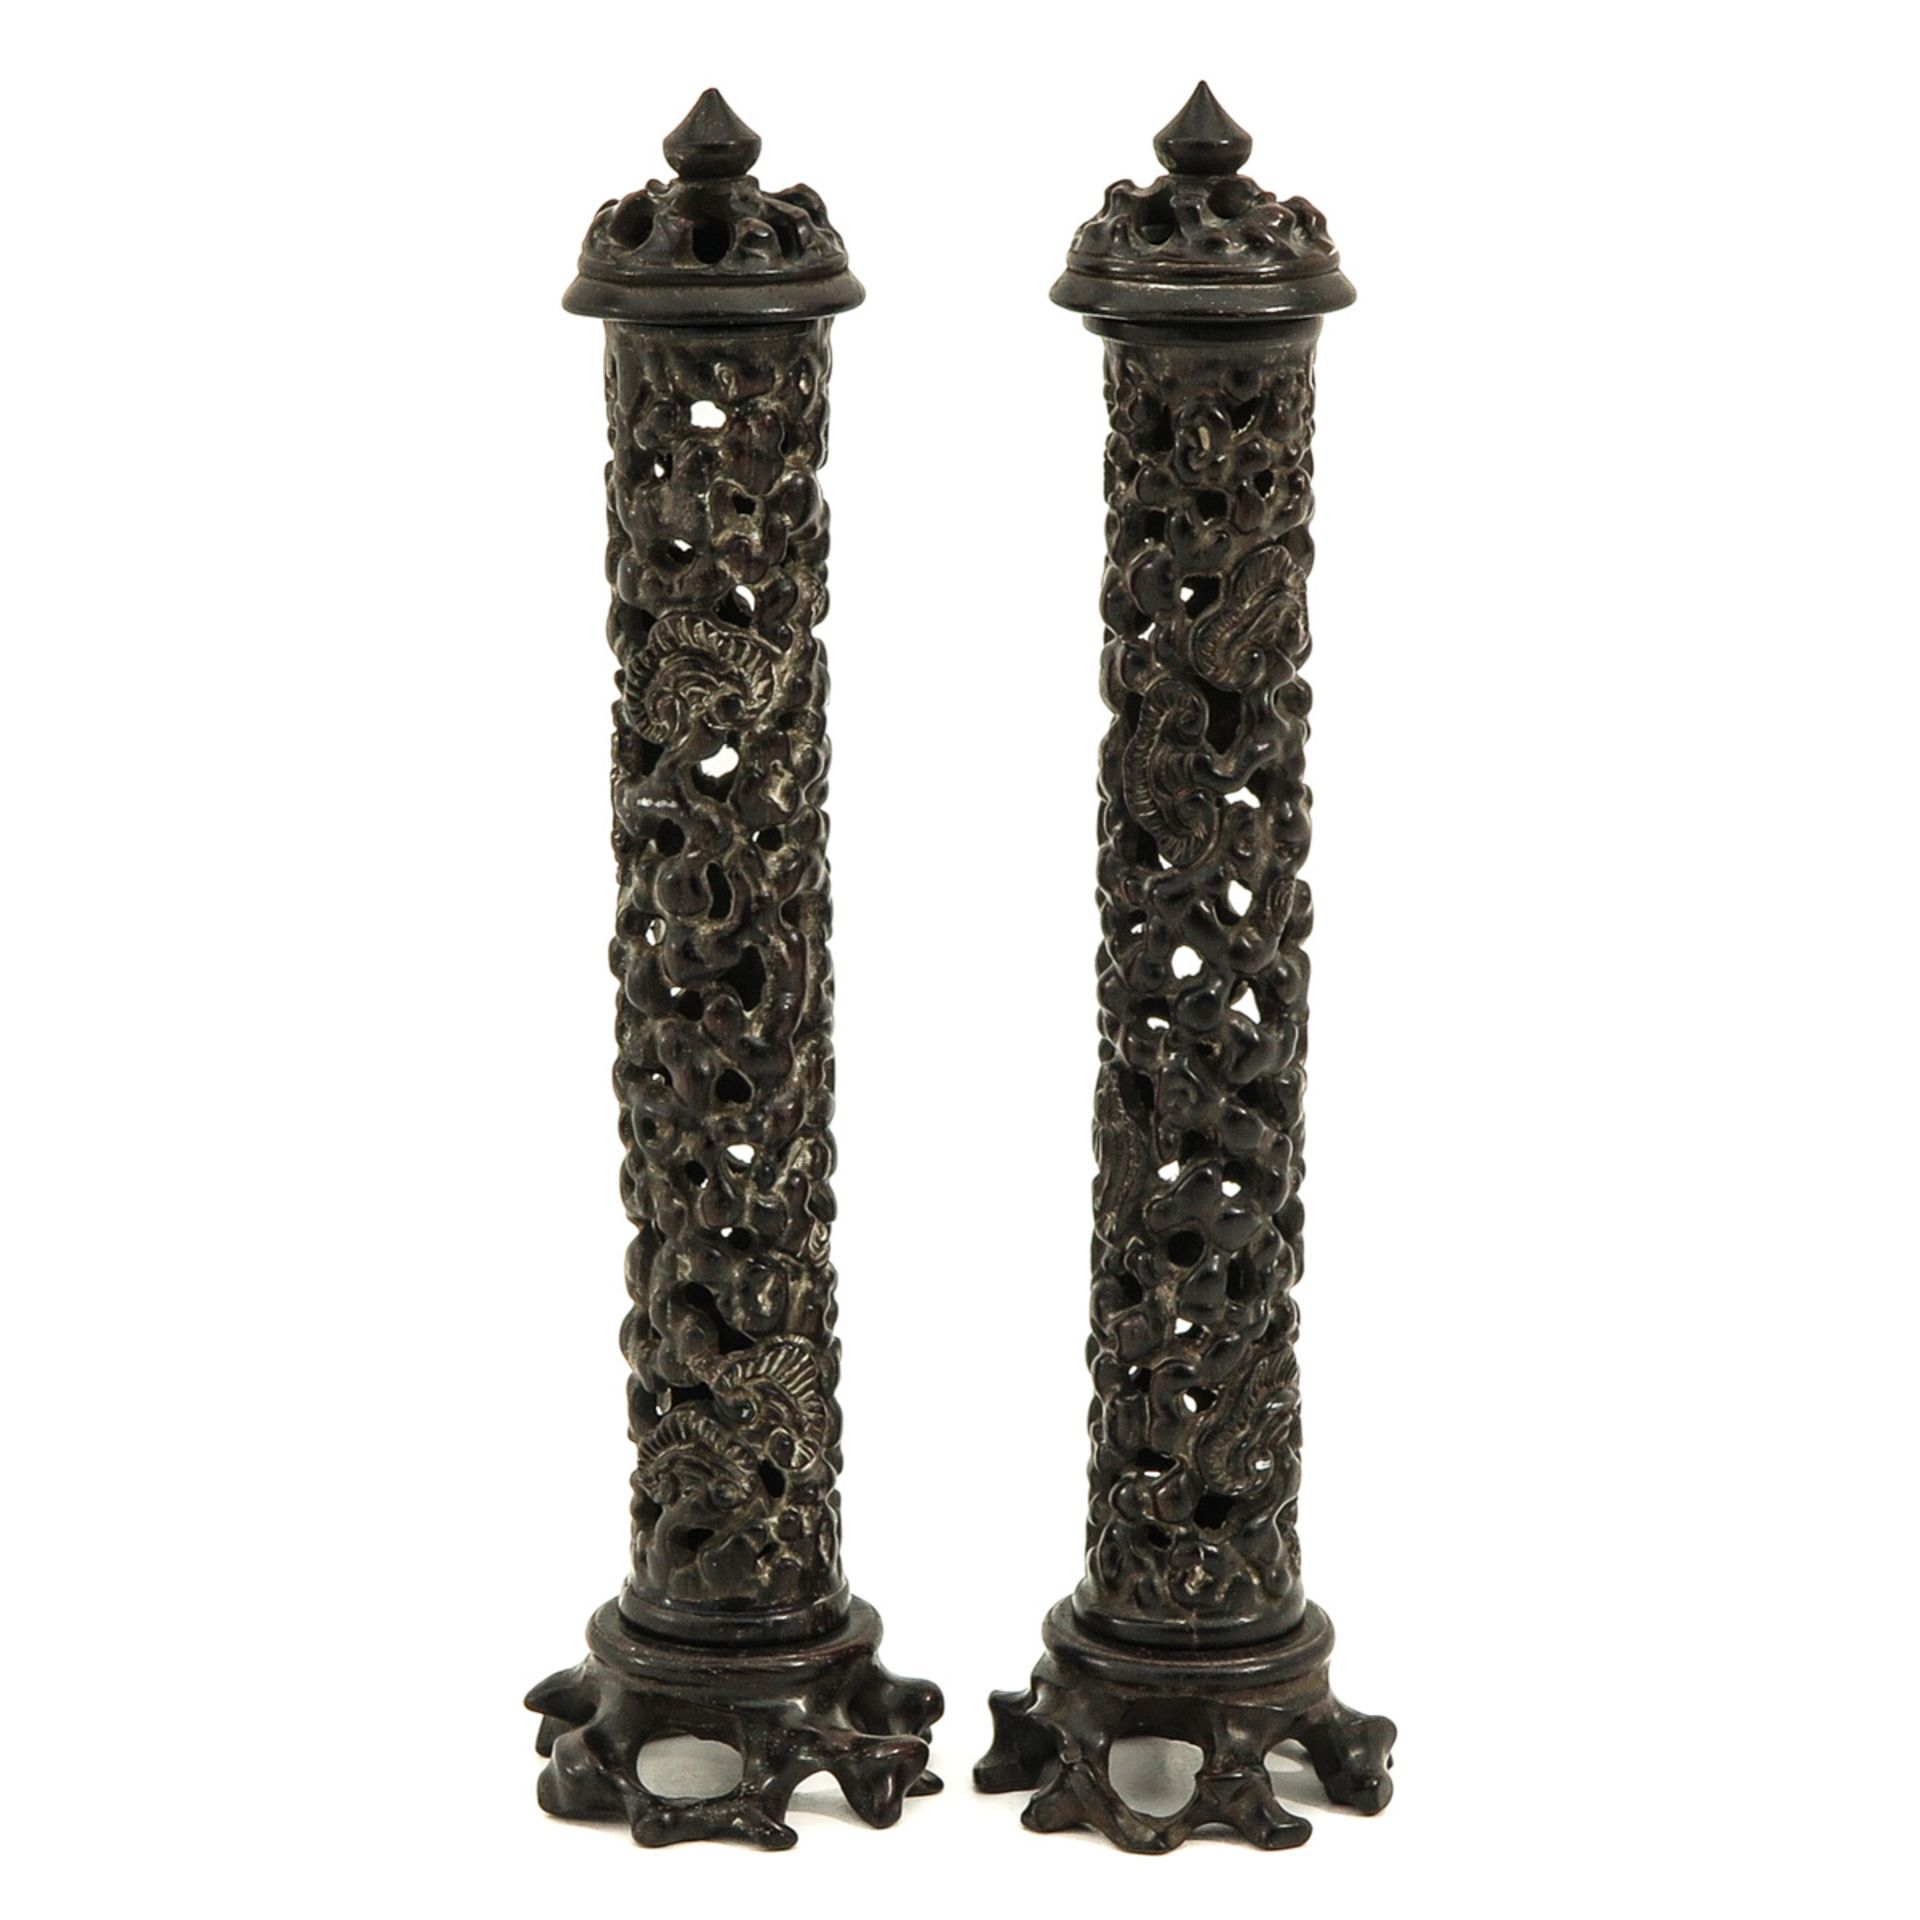 A Pair of Carved Incense Holders